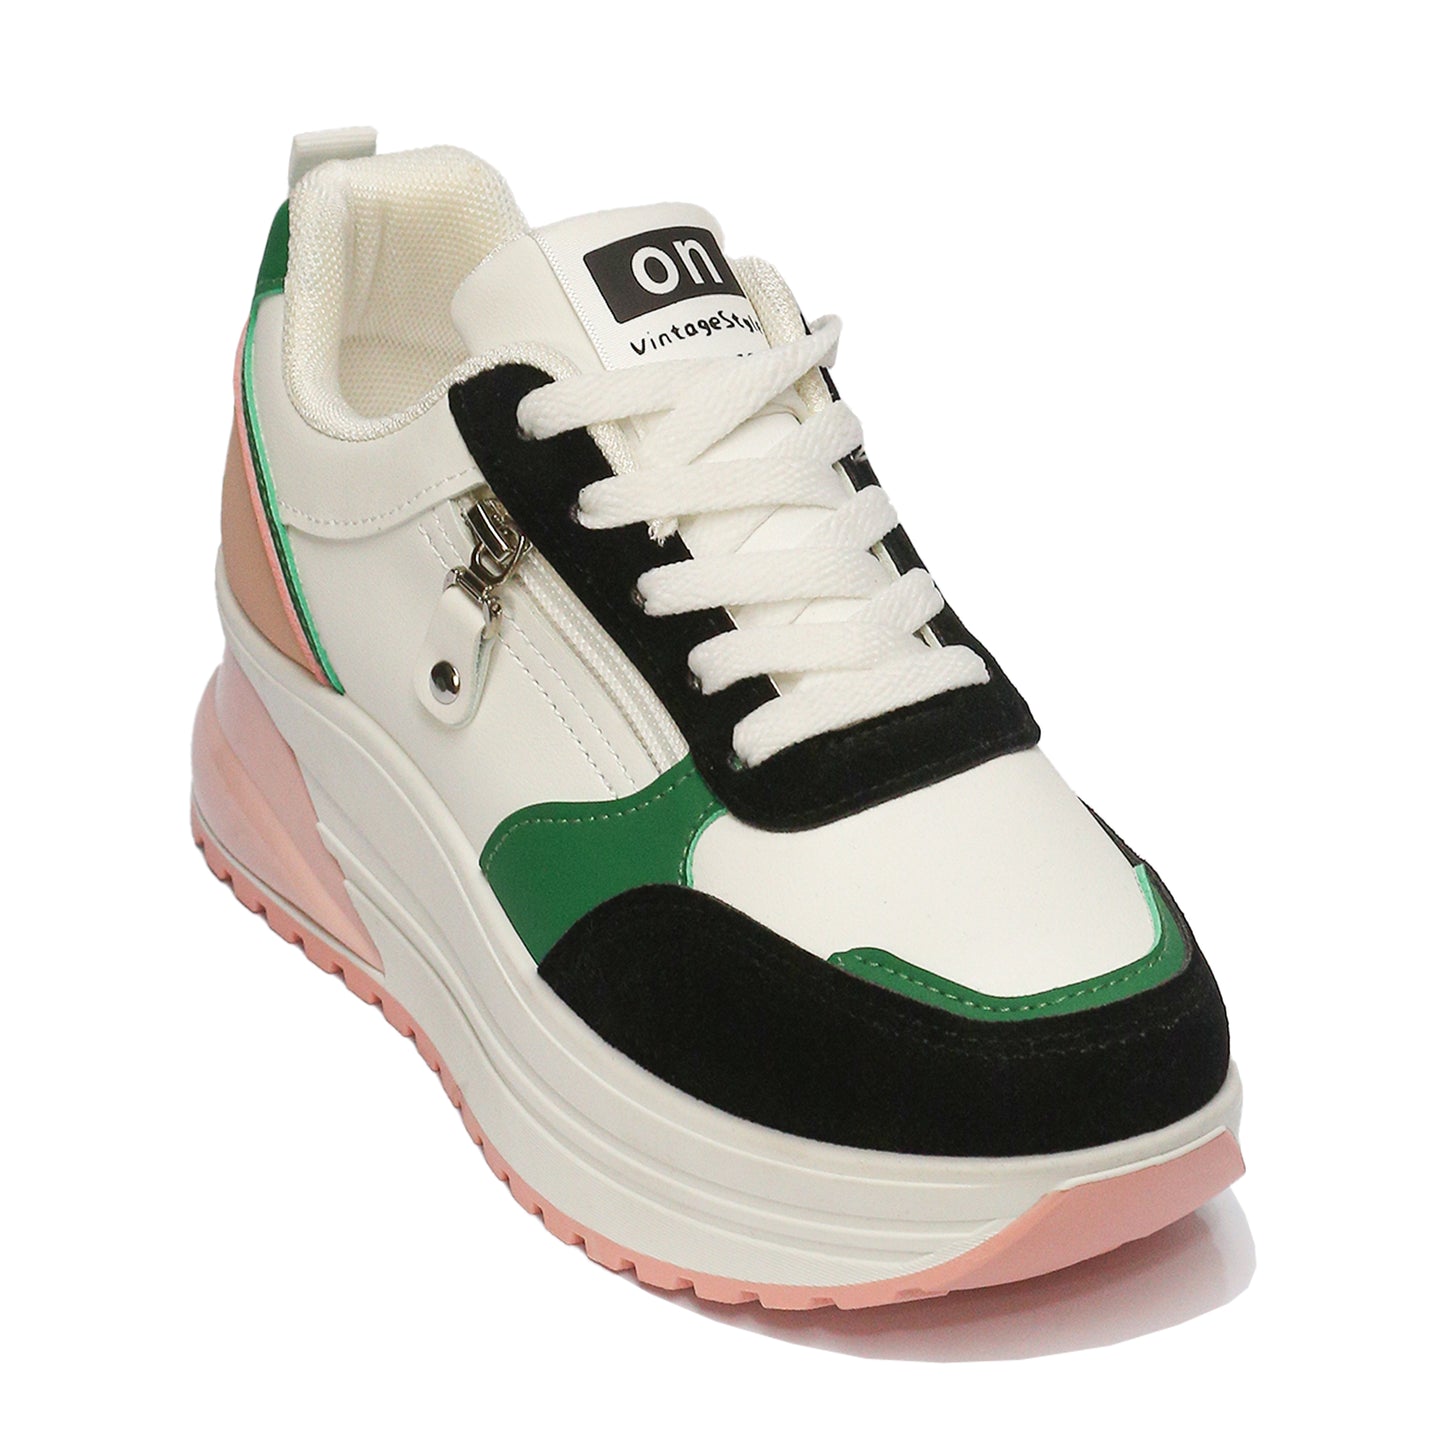 New Vintage Style Sneakers For Women